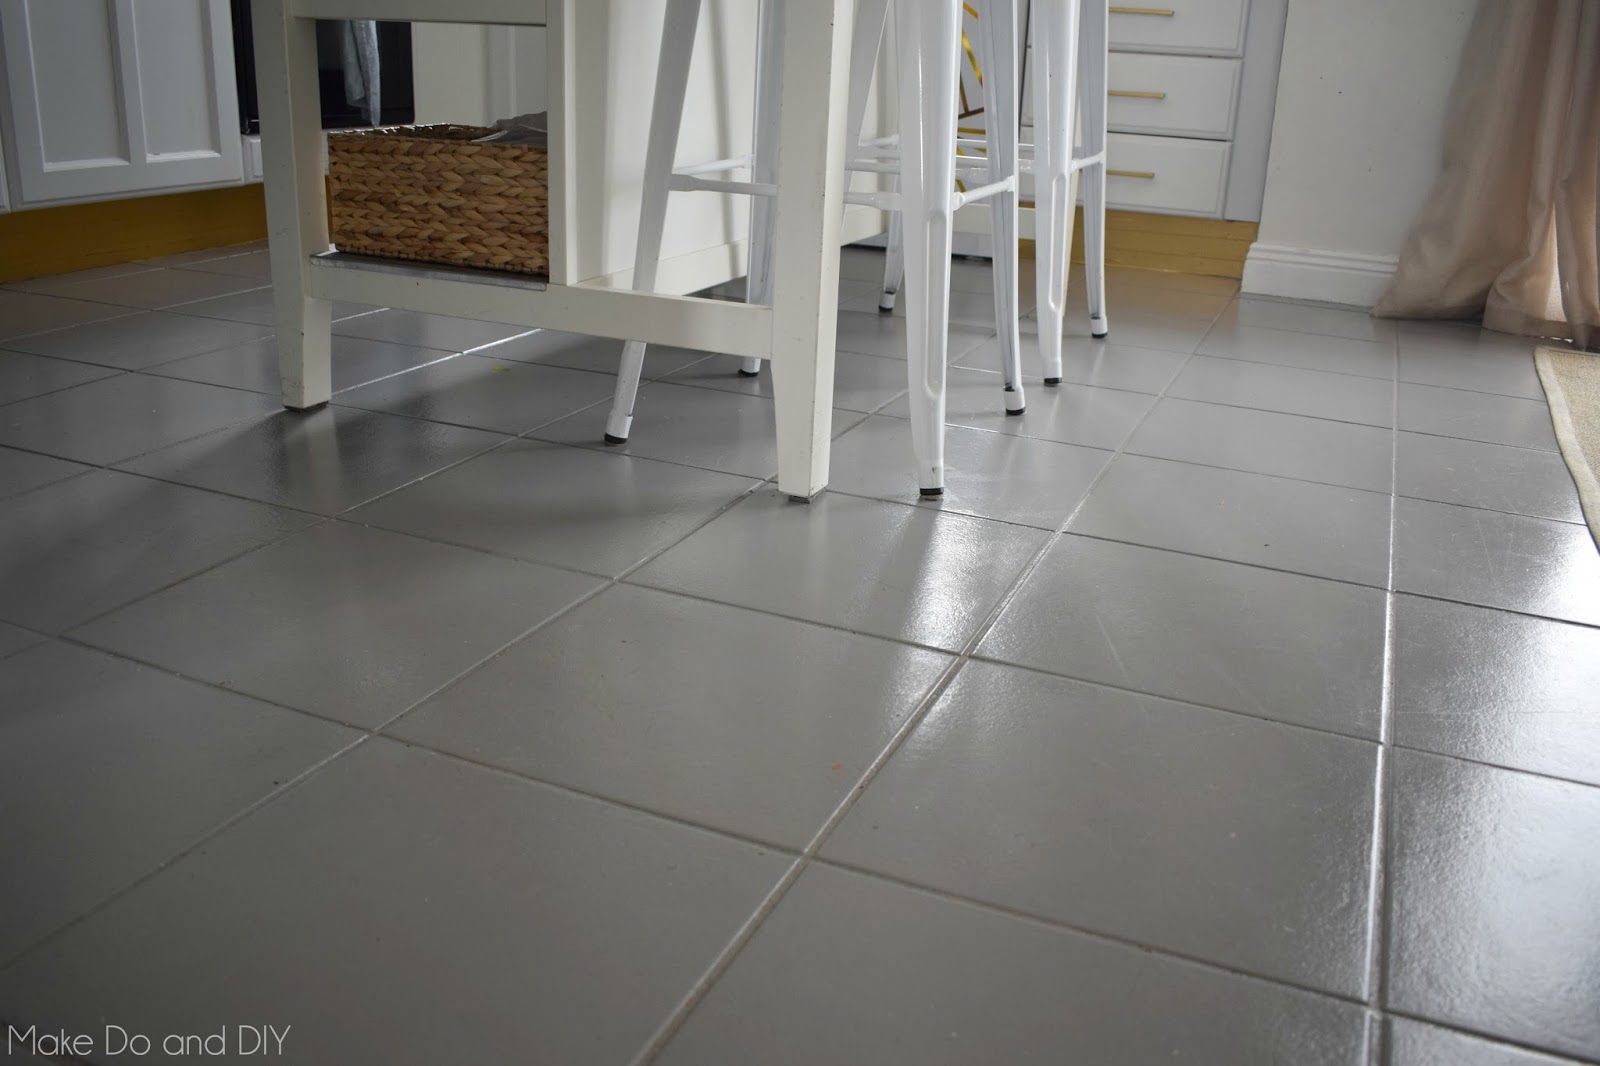 painted-tile-floor-six-months-later-make-do-and-diy